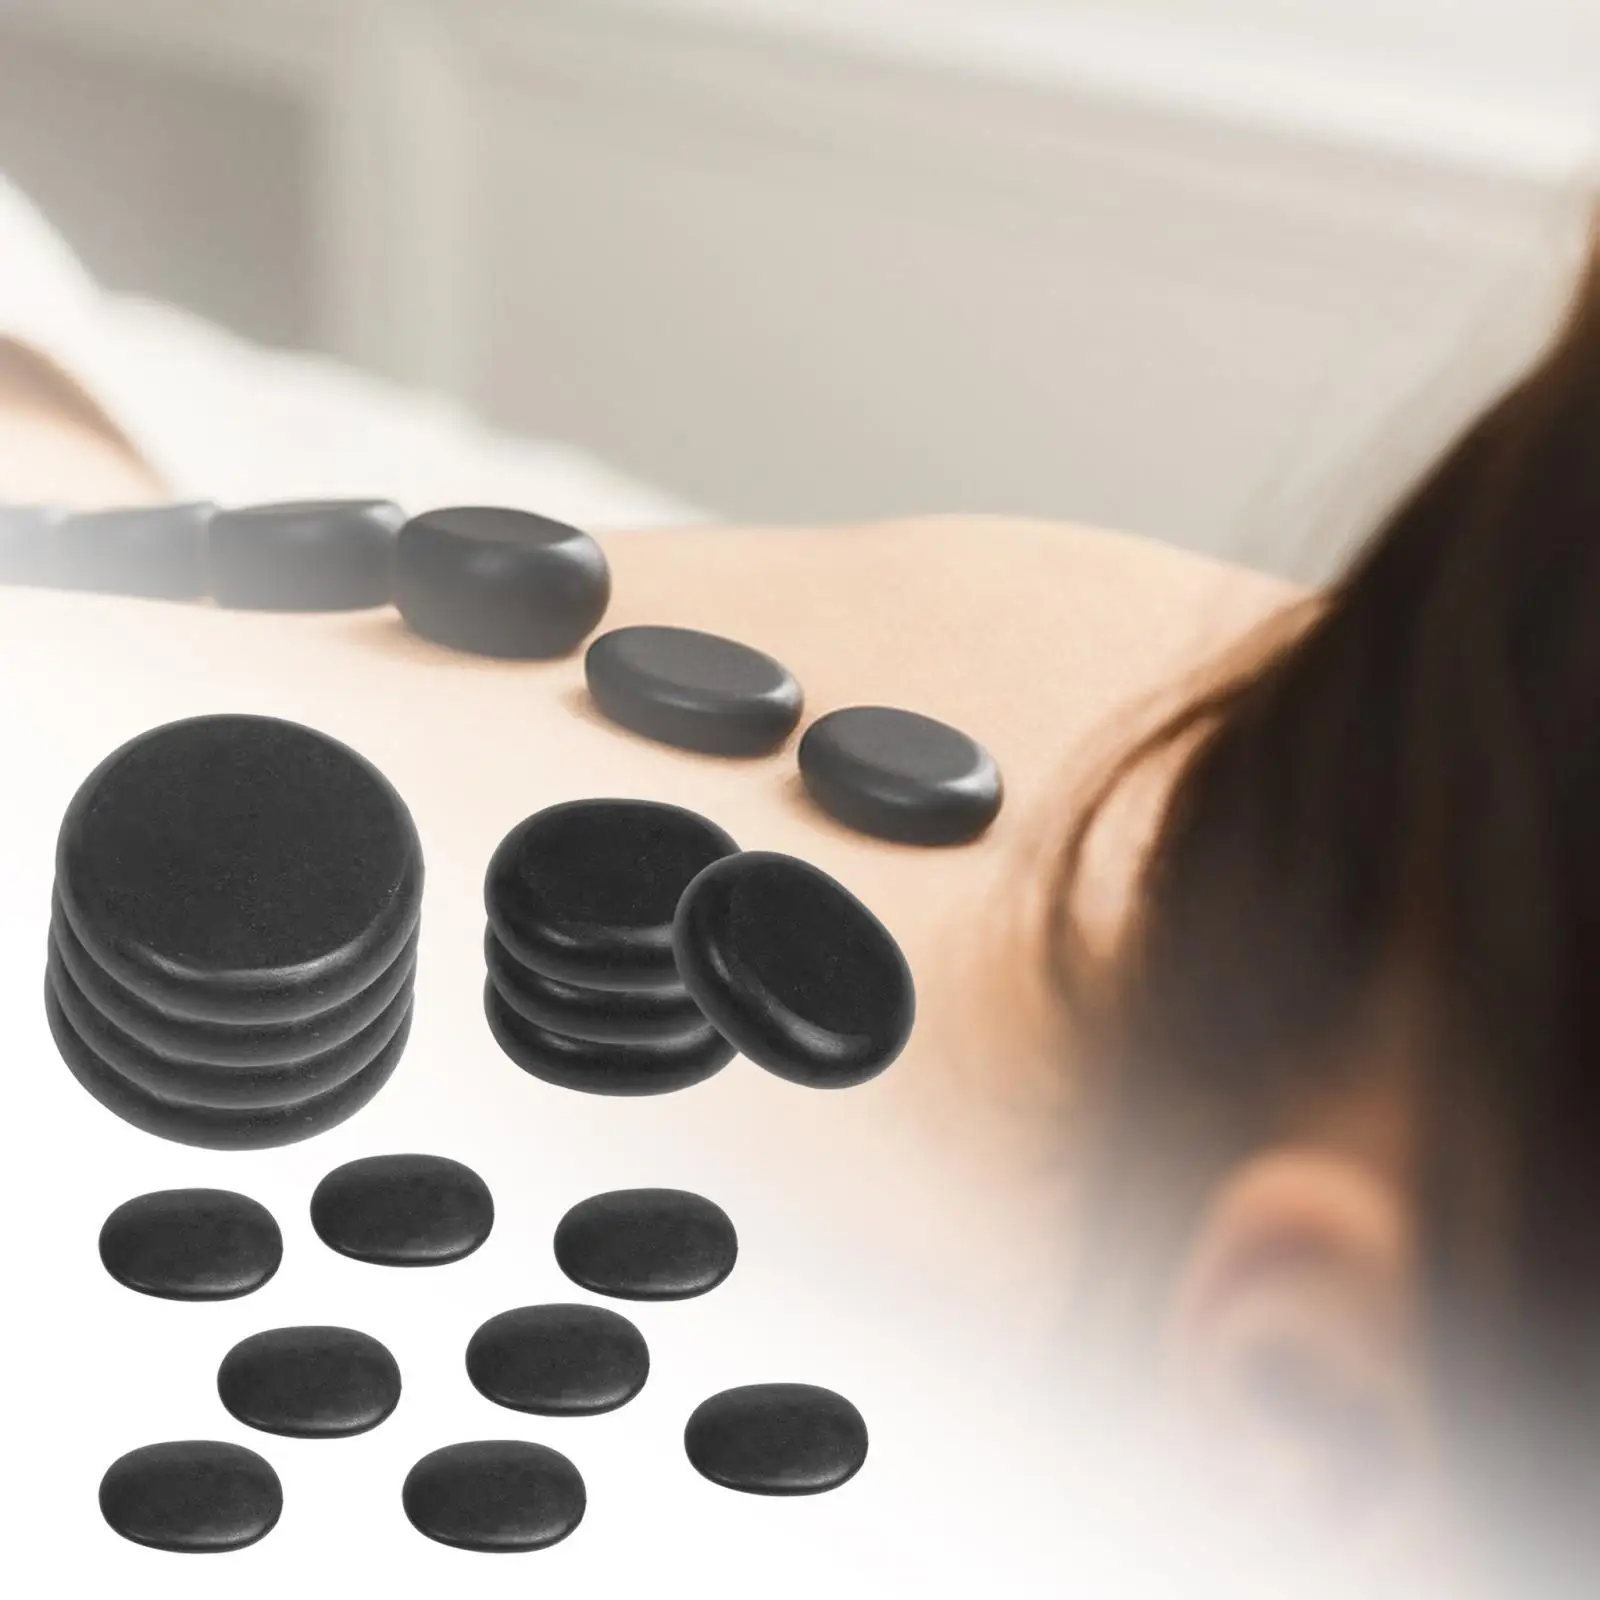 16x Hot Stone Massage Set SPA Stones Easy to Clean Portable Beauty Tools Relaxation